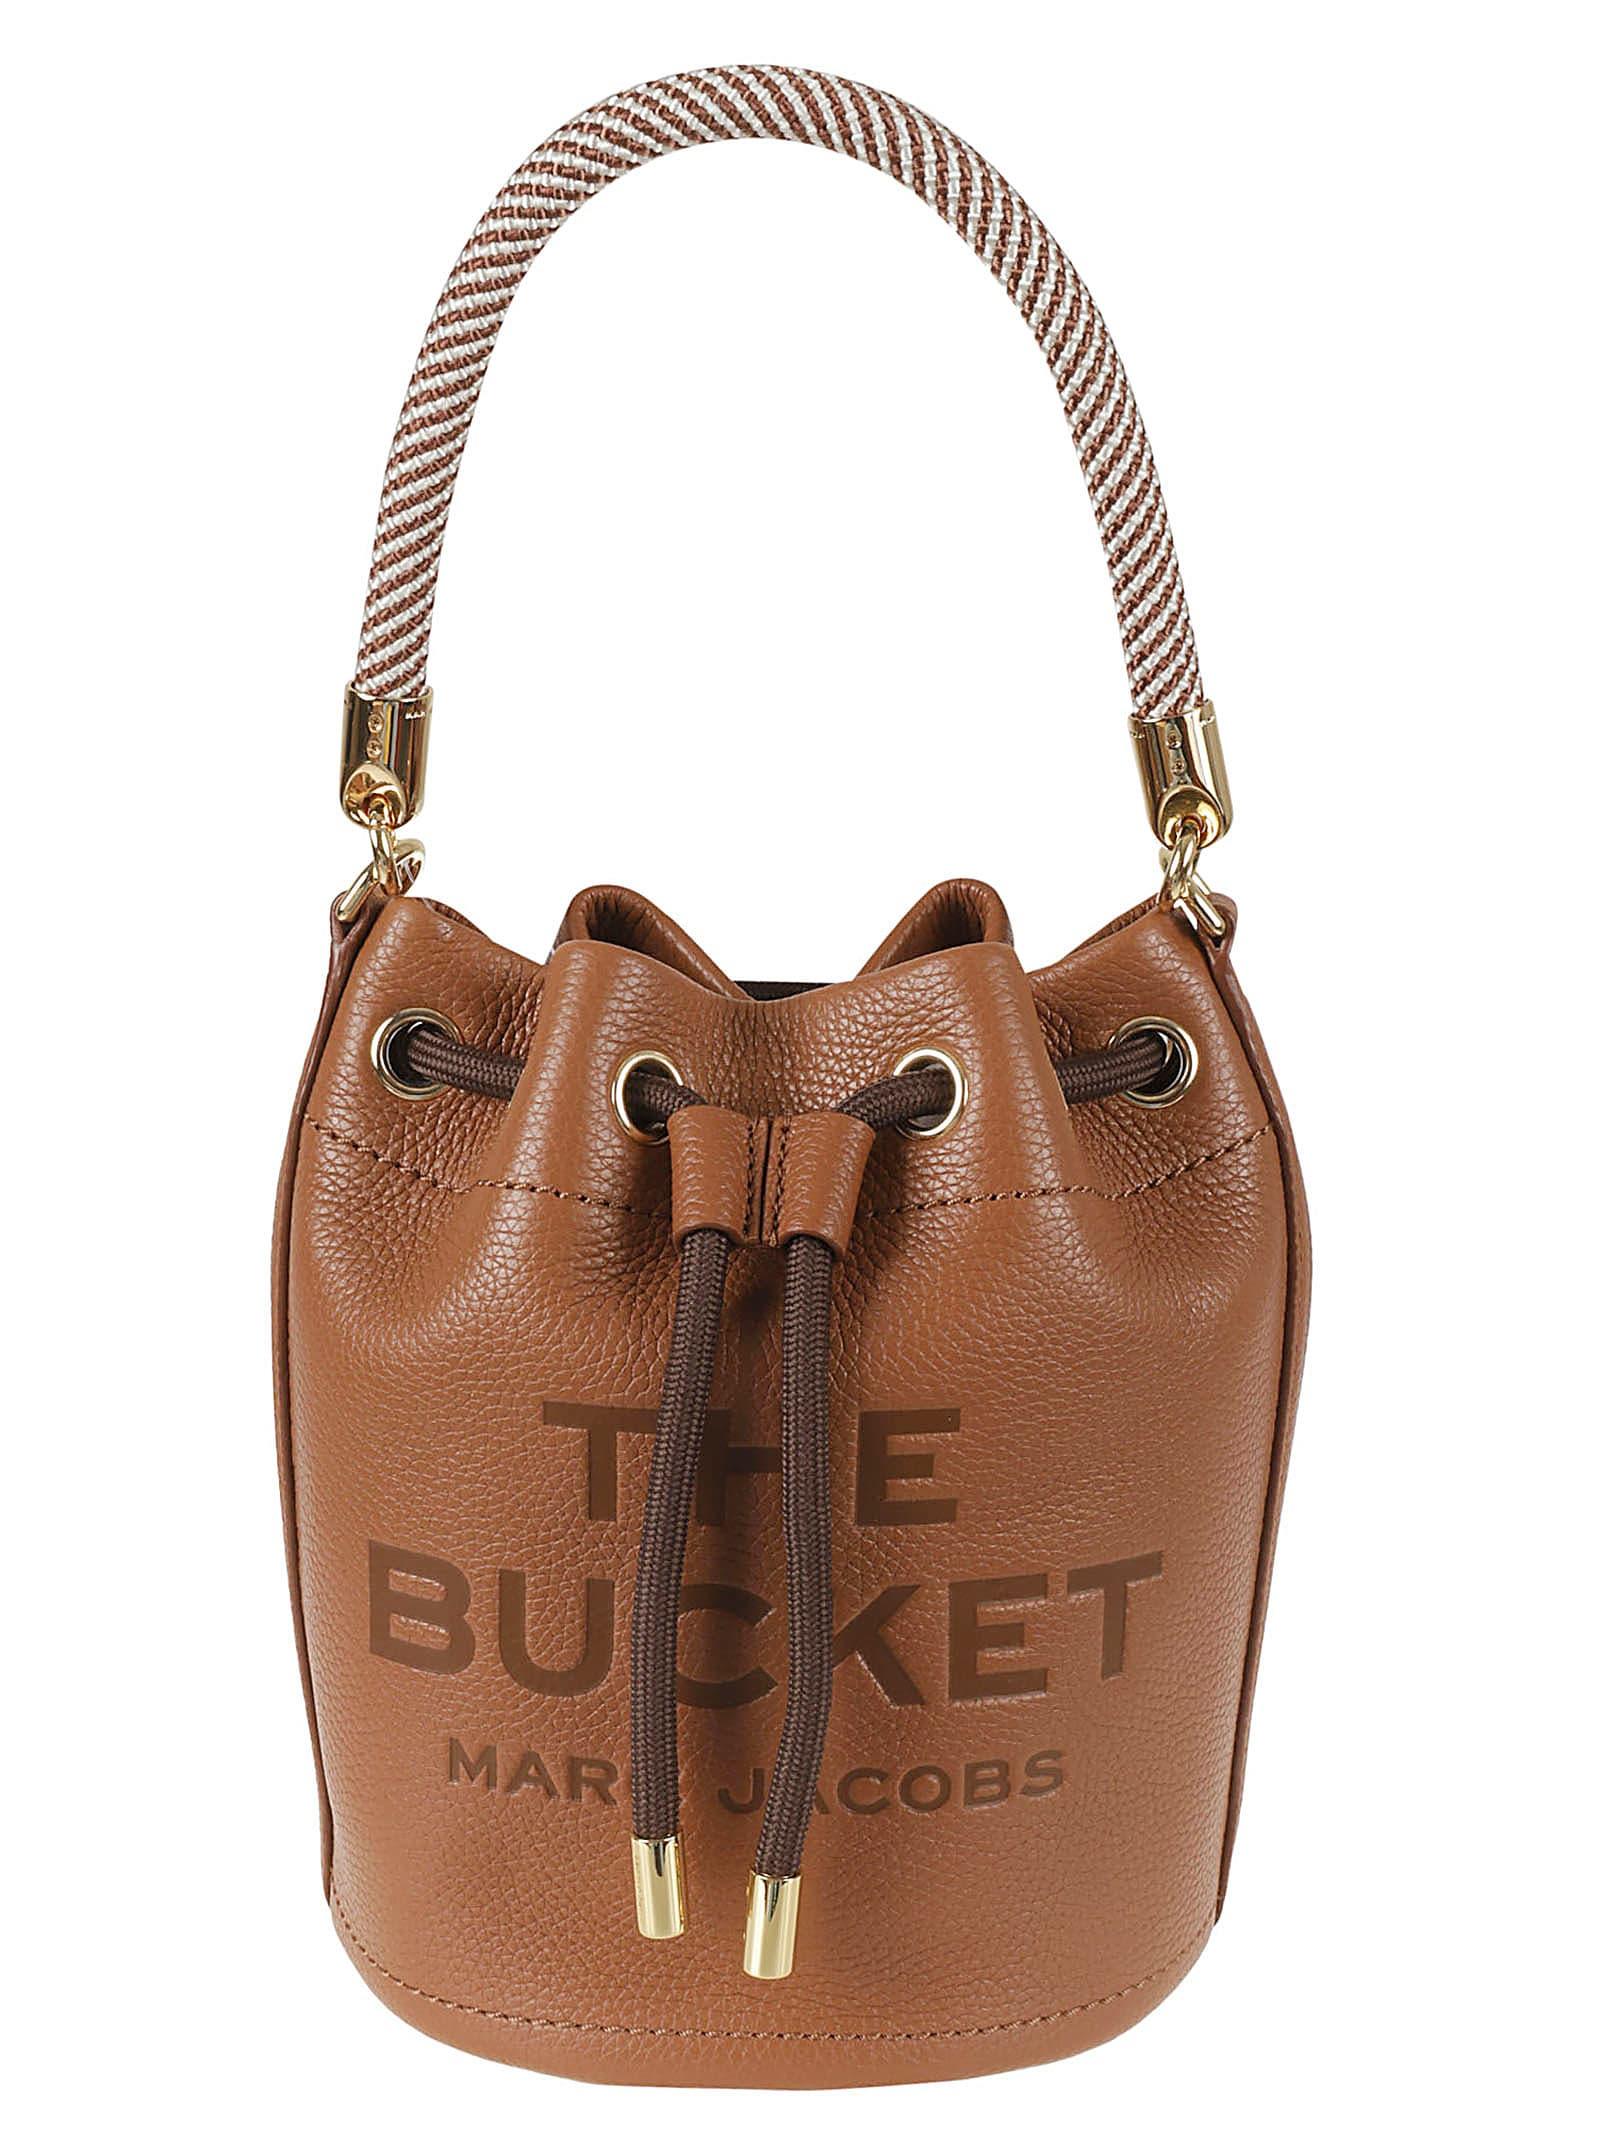 Marc Jacobs The Bucket Bag in Brown | Lyst